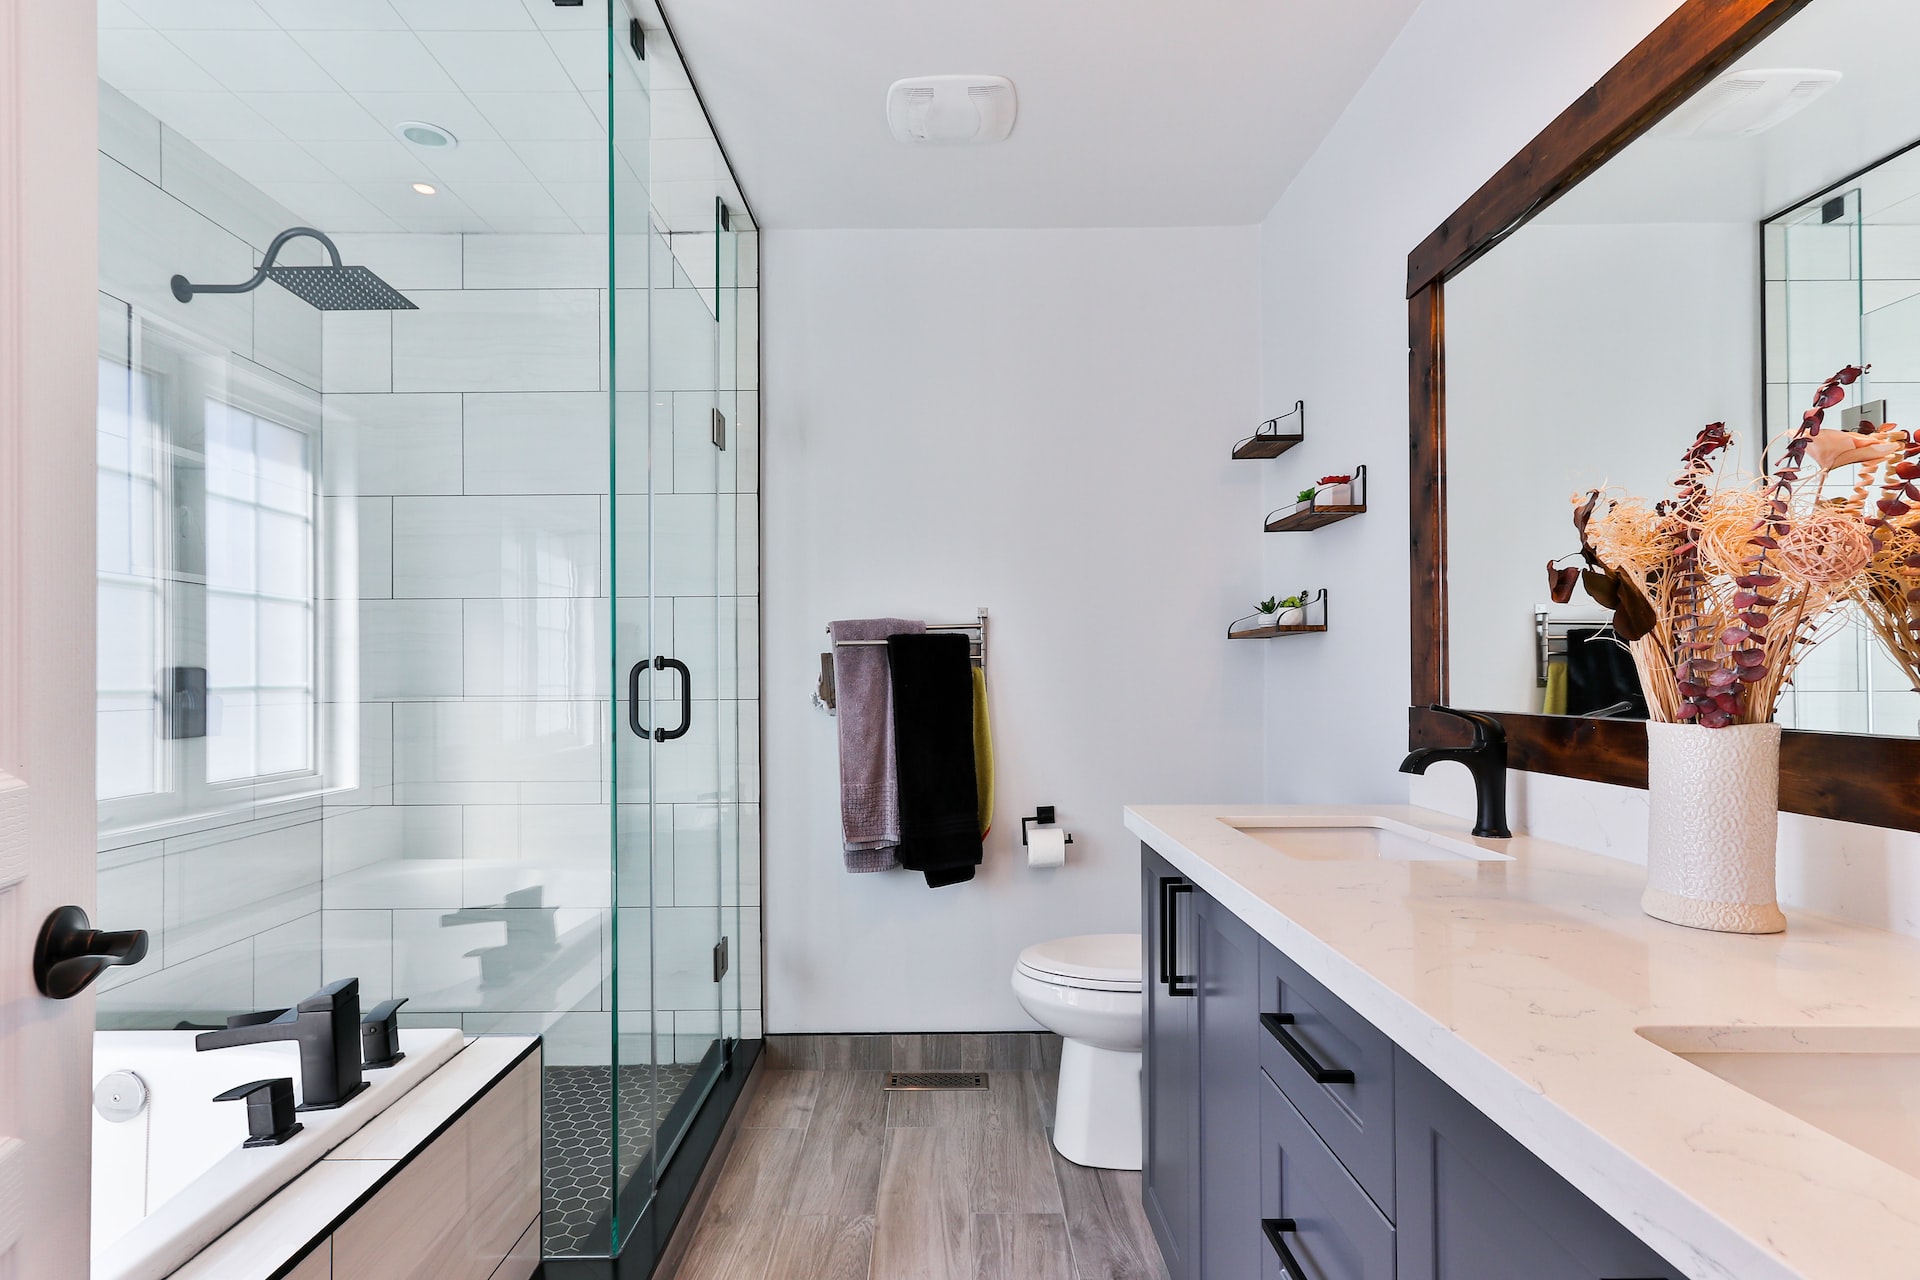 How to start a restroom cleaning business?